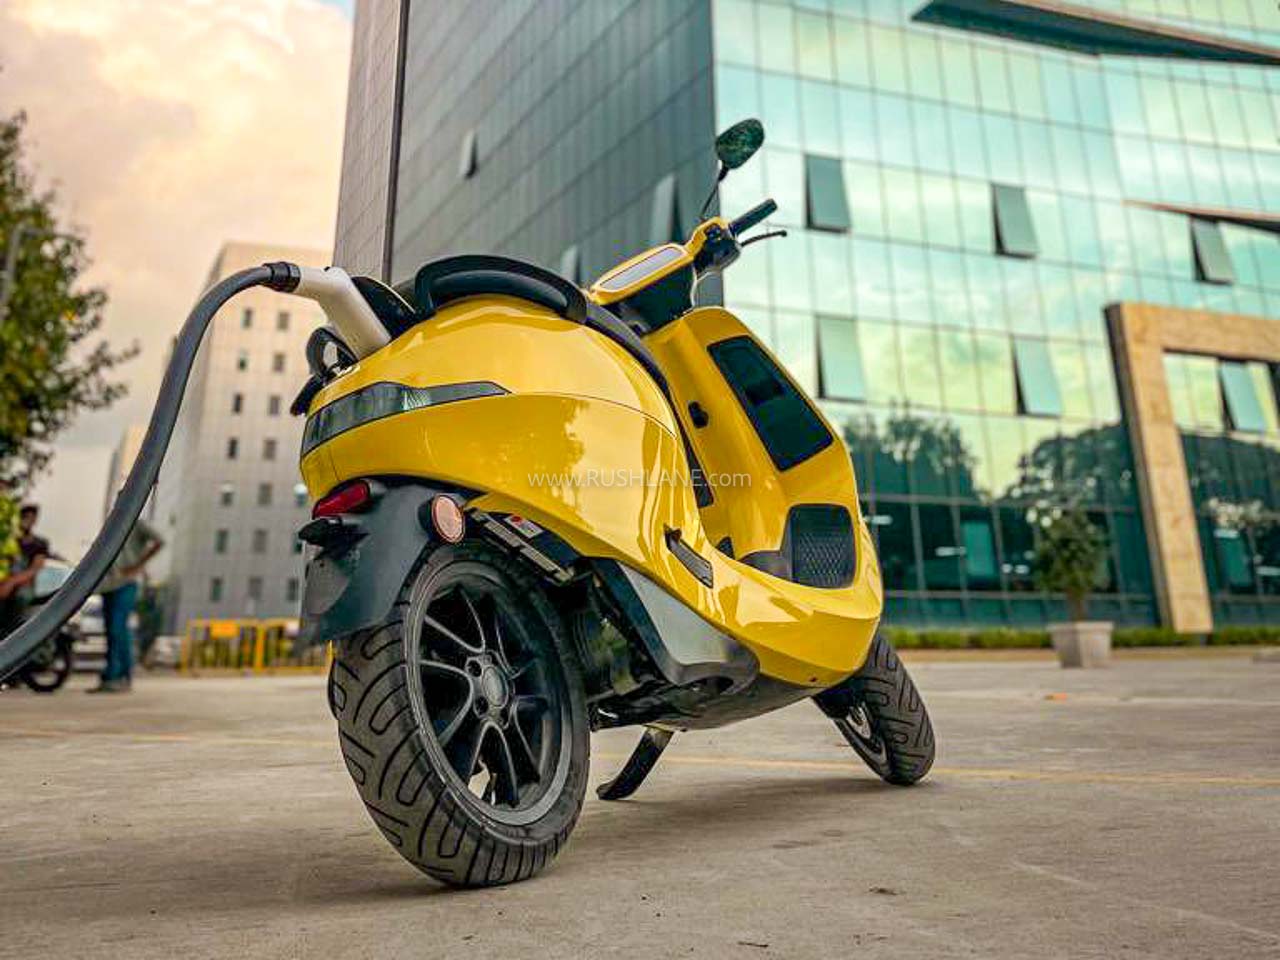 https://www.rushlane.com/wp-content/uploads/2021/12/new-ola-electric-scooter-charging-network-india-1.jpg